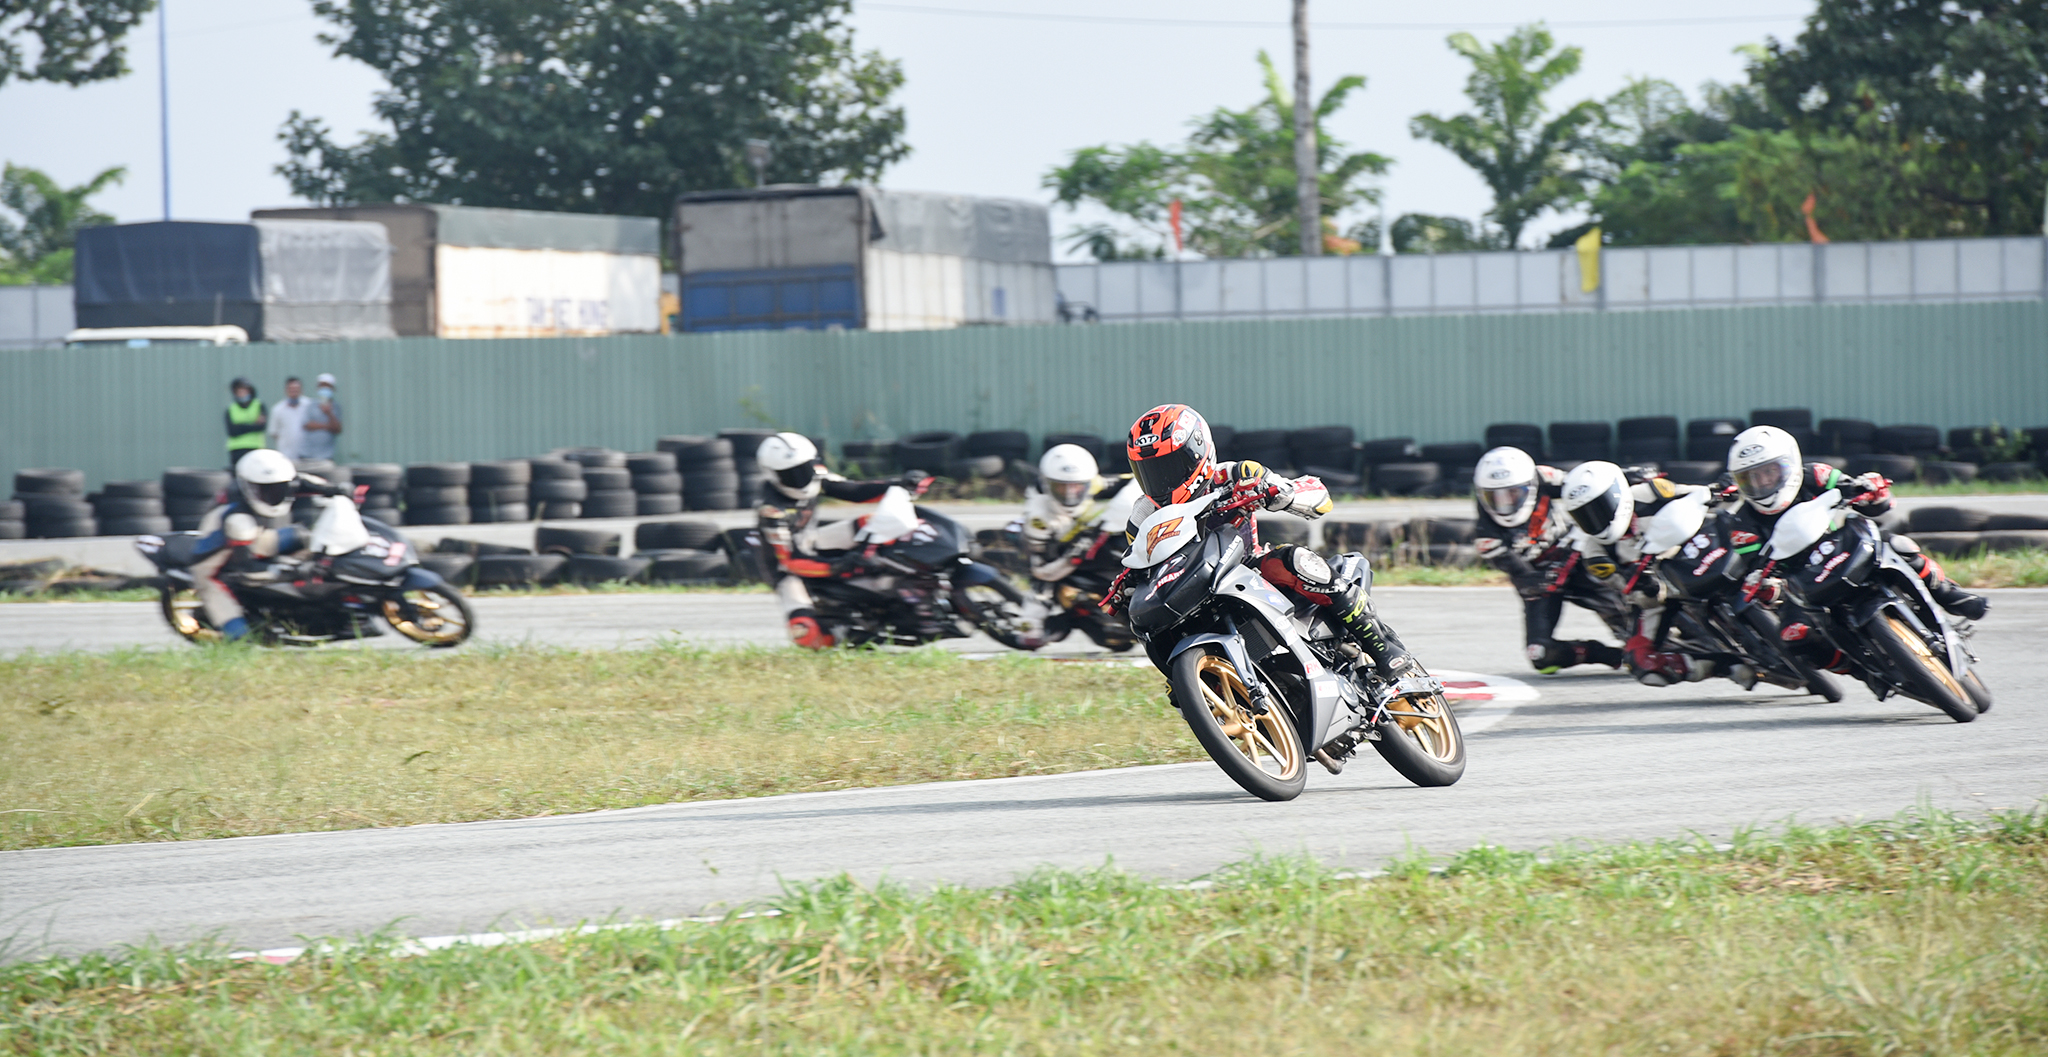 Racing season VMRC 2022 – Stage 1 ready to start in Binh Duong Summary of Vietnam Motorcycle Racing 2020: Overcoming difficulties for success Stage 3 VMRC 2020: Duc Thanh shines, Dong Nghi impresses 44.jpg